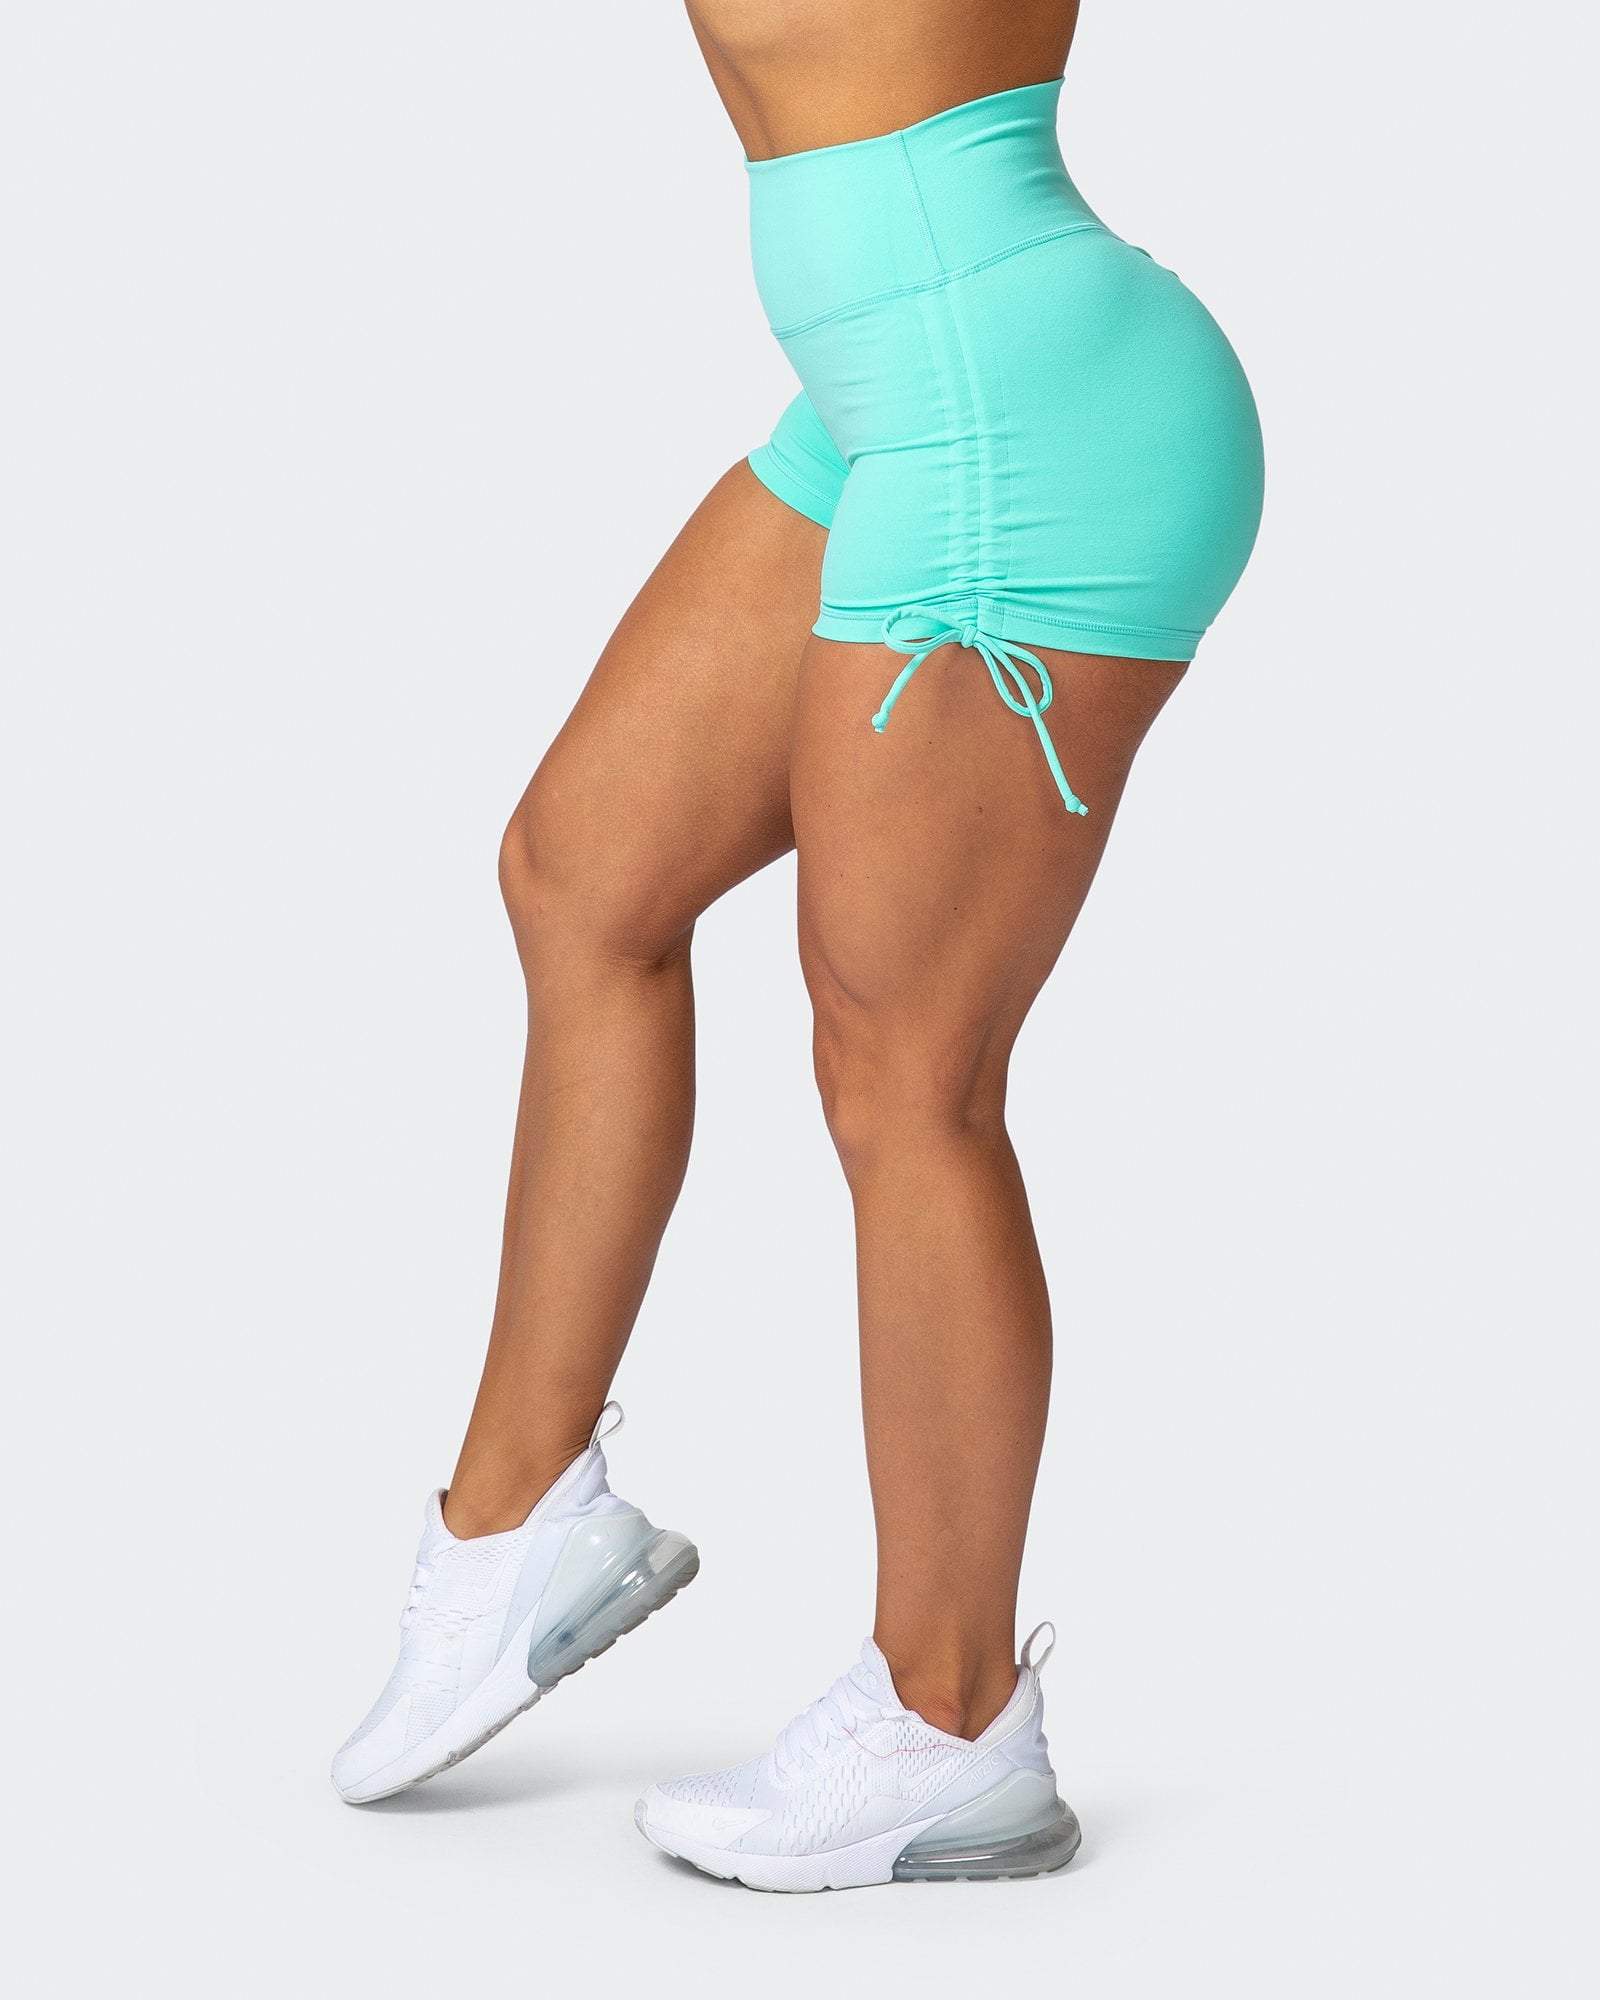 musclenation SIGNATURE SCRUNCH TIE UP BOOTY SHORTS Sea Glass